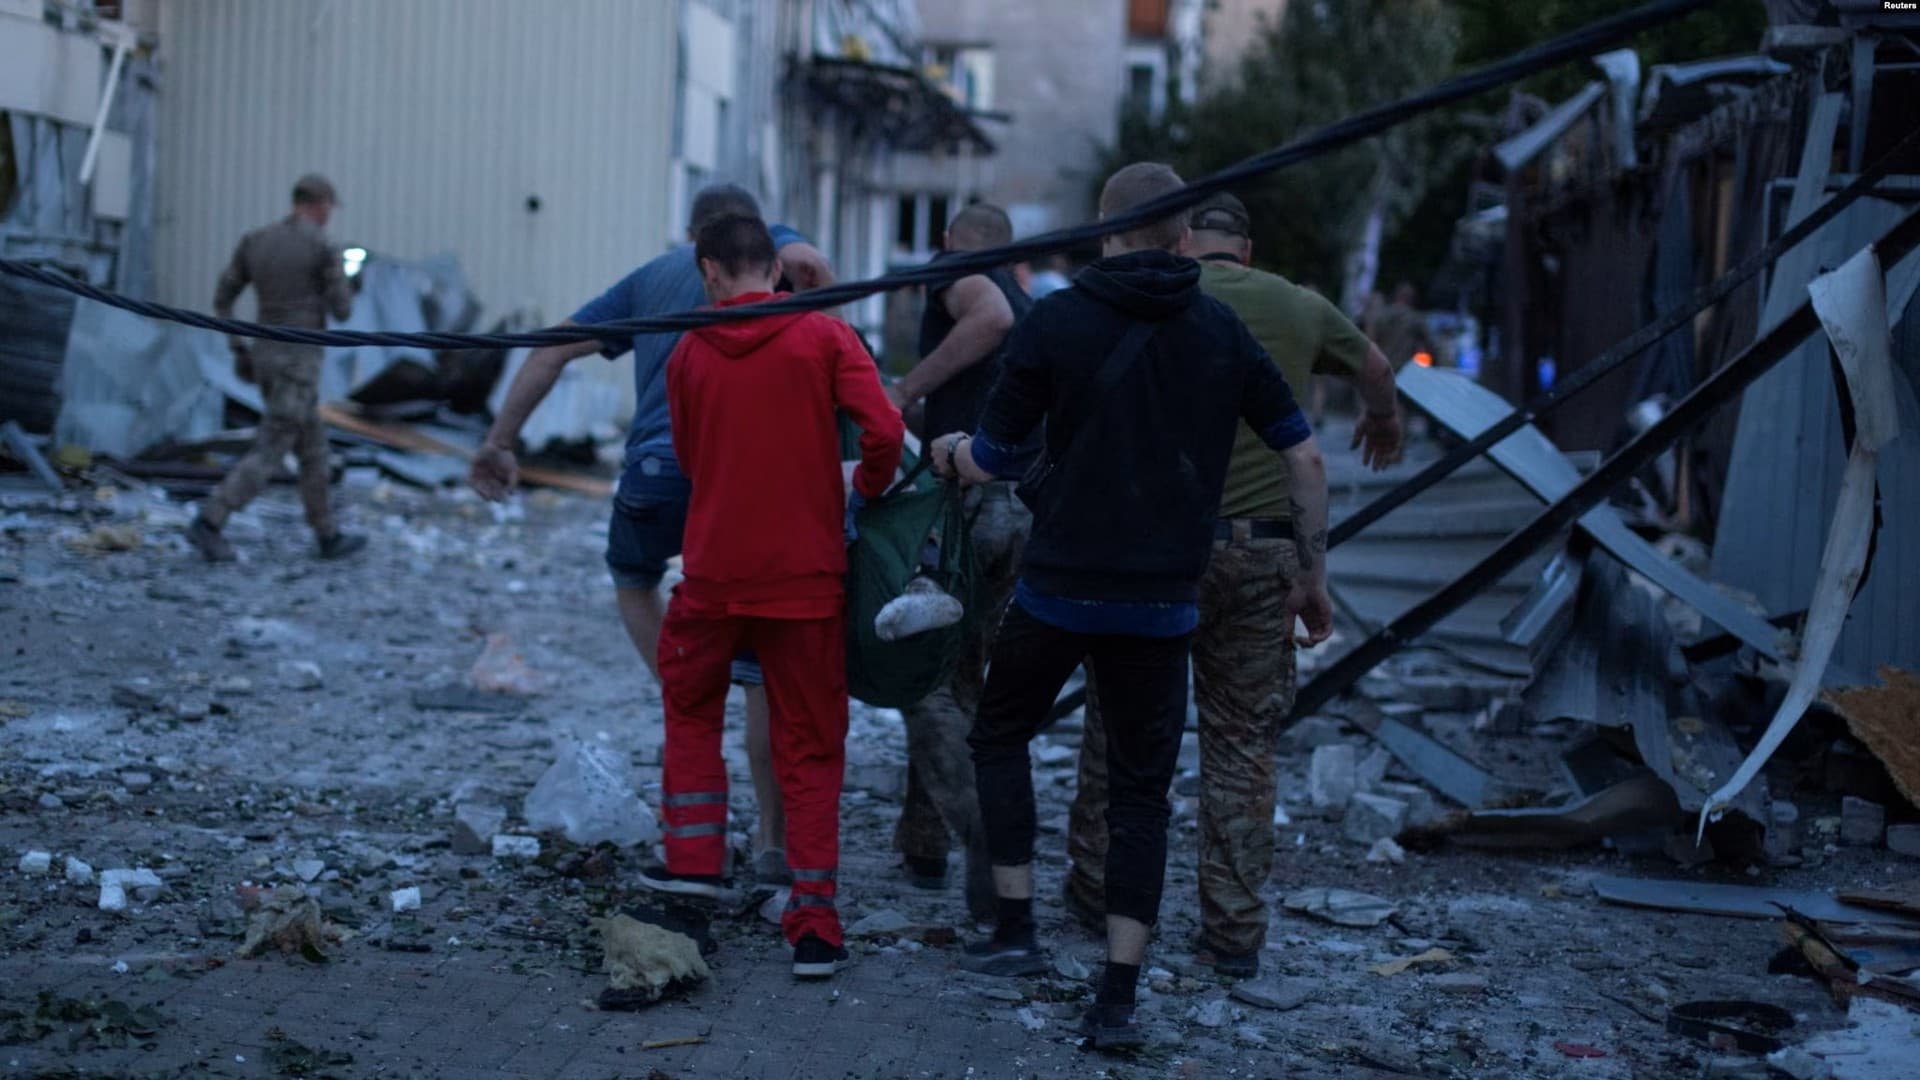 Volunteers carry an injured person away from hotel and restaurant buildings, which were heavily damaged in a deadly Russian missile strike on the city of Kramatorsk